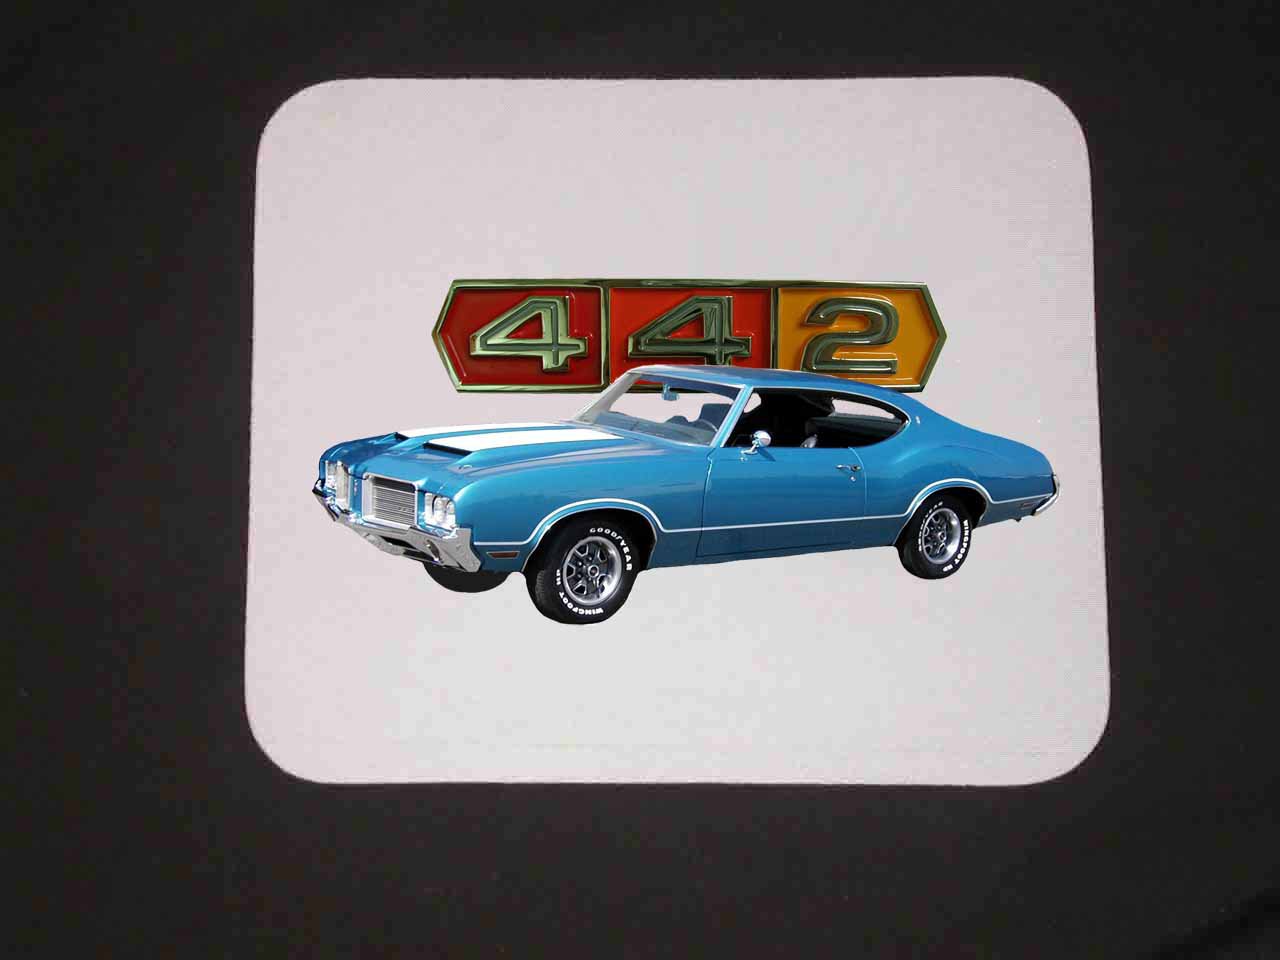 New 1971 Olds 442 Mousepad!